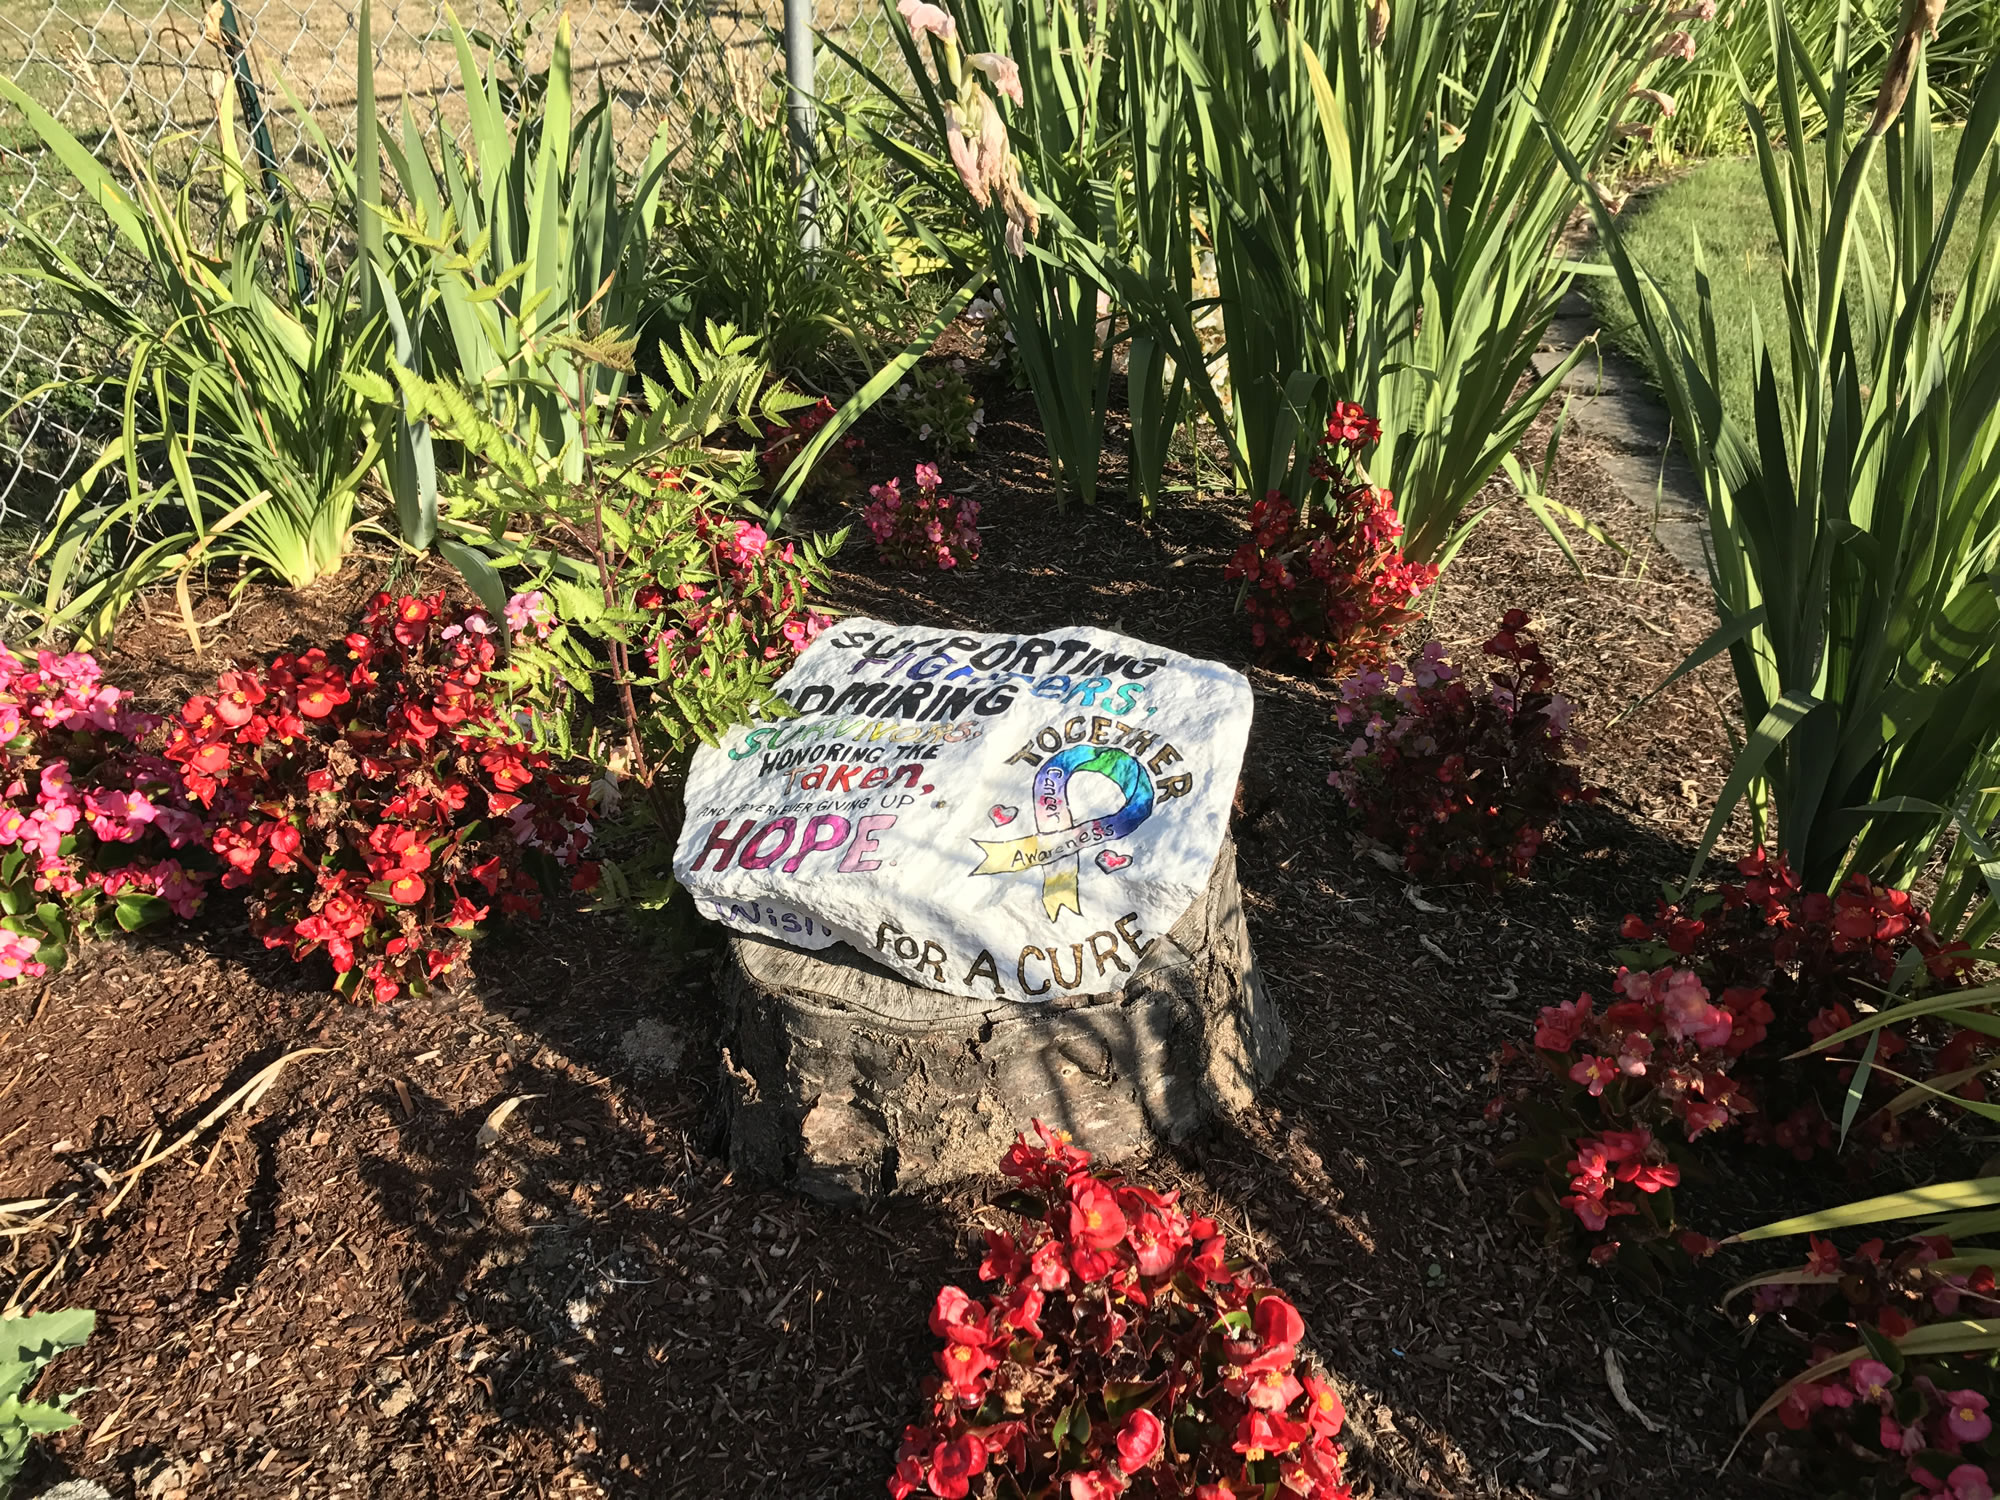 Teresa Marble placed this remembrance rock, symbolizing cancer fighters and survivors, on a stump in her yard in August. Sometime before Thanksgiving, the rock disappeared.